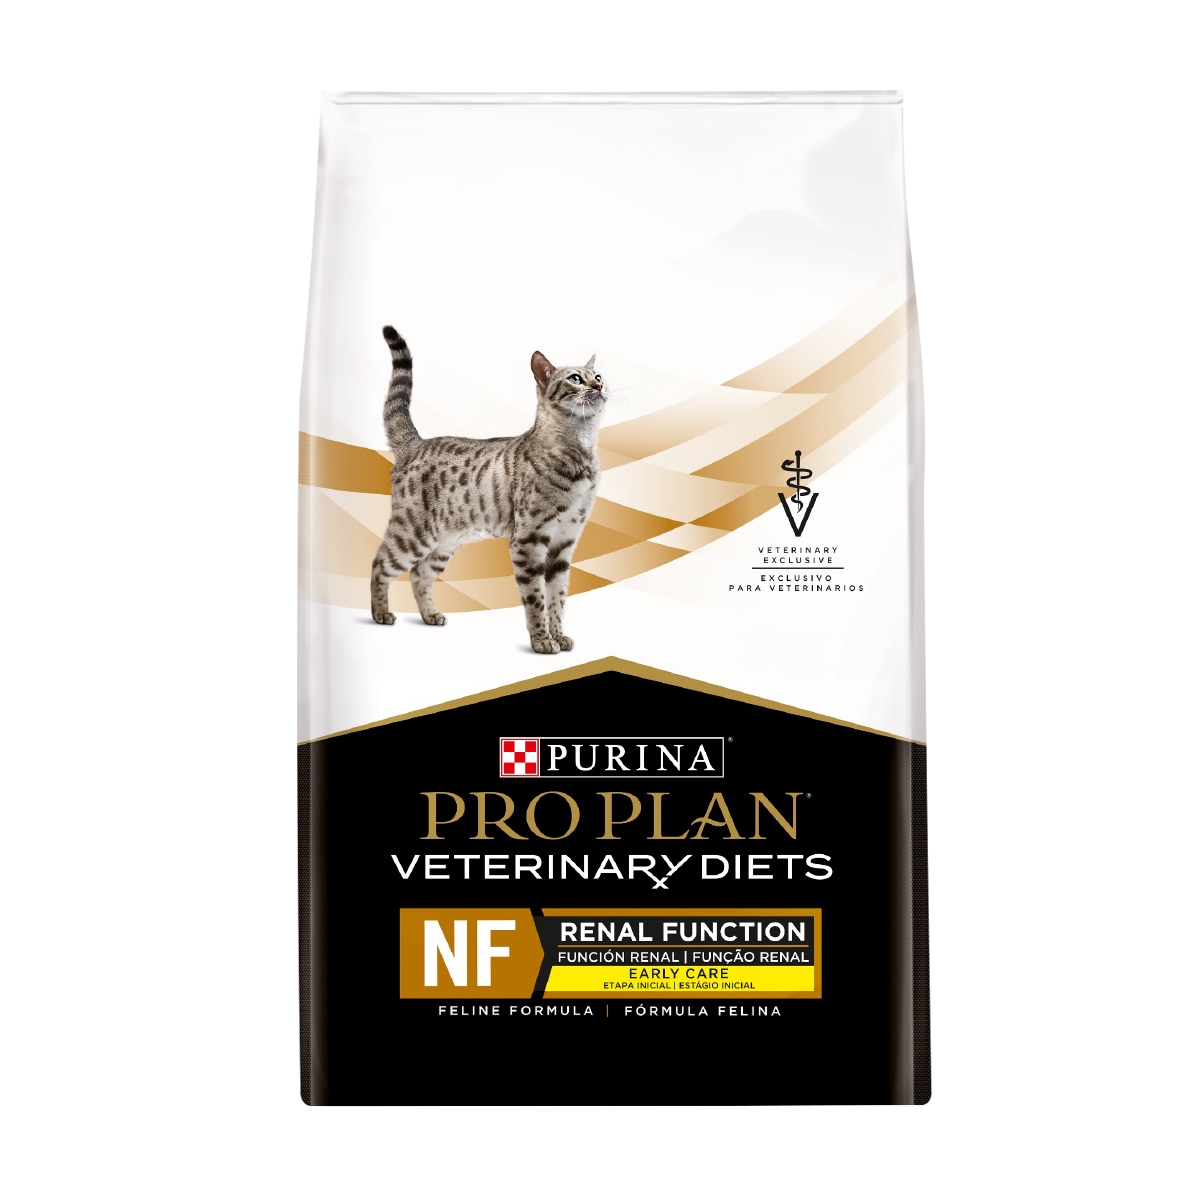 purina-pro-plan-veterinay-diets-cat-nf-renal-function-early-care.png